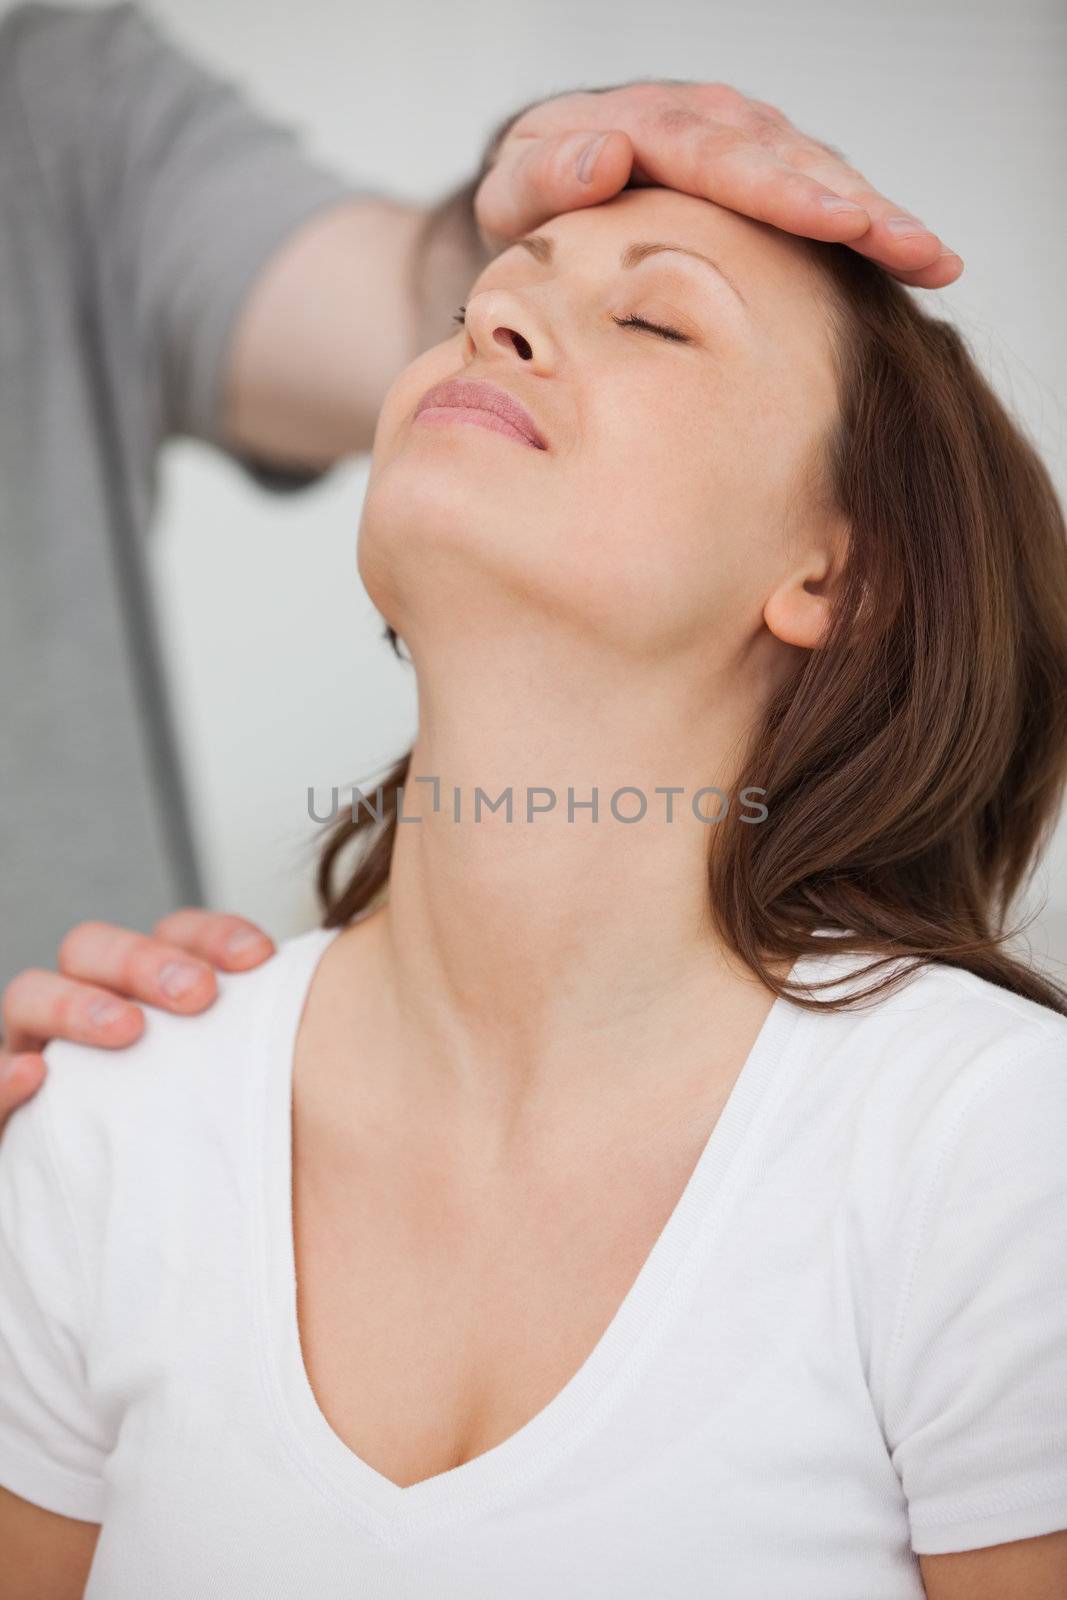 Doctor posing his hand on the forehead of a patient by Wavebreakmedia